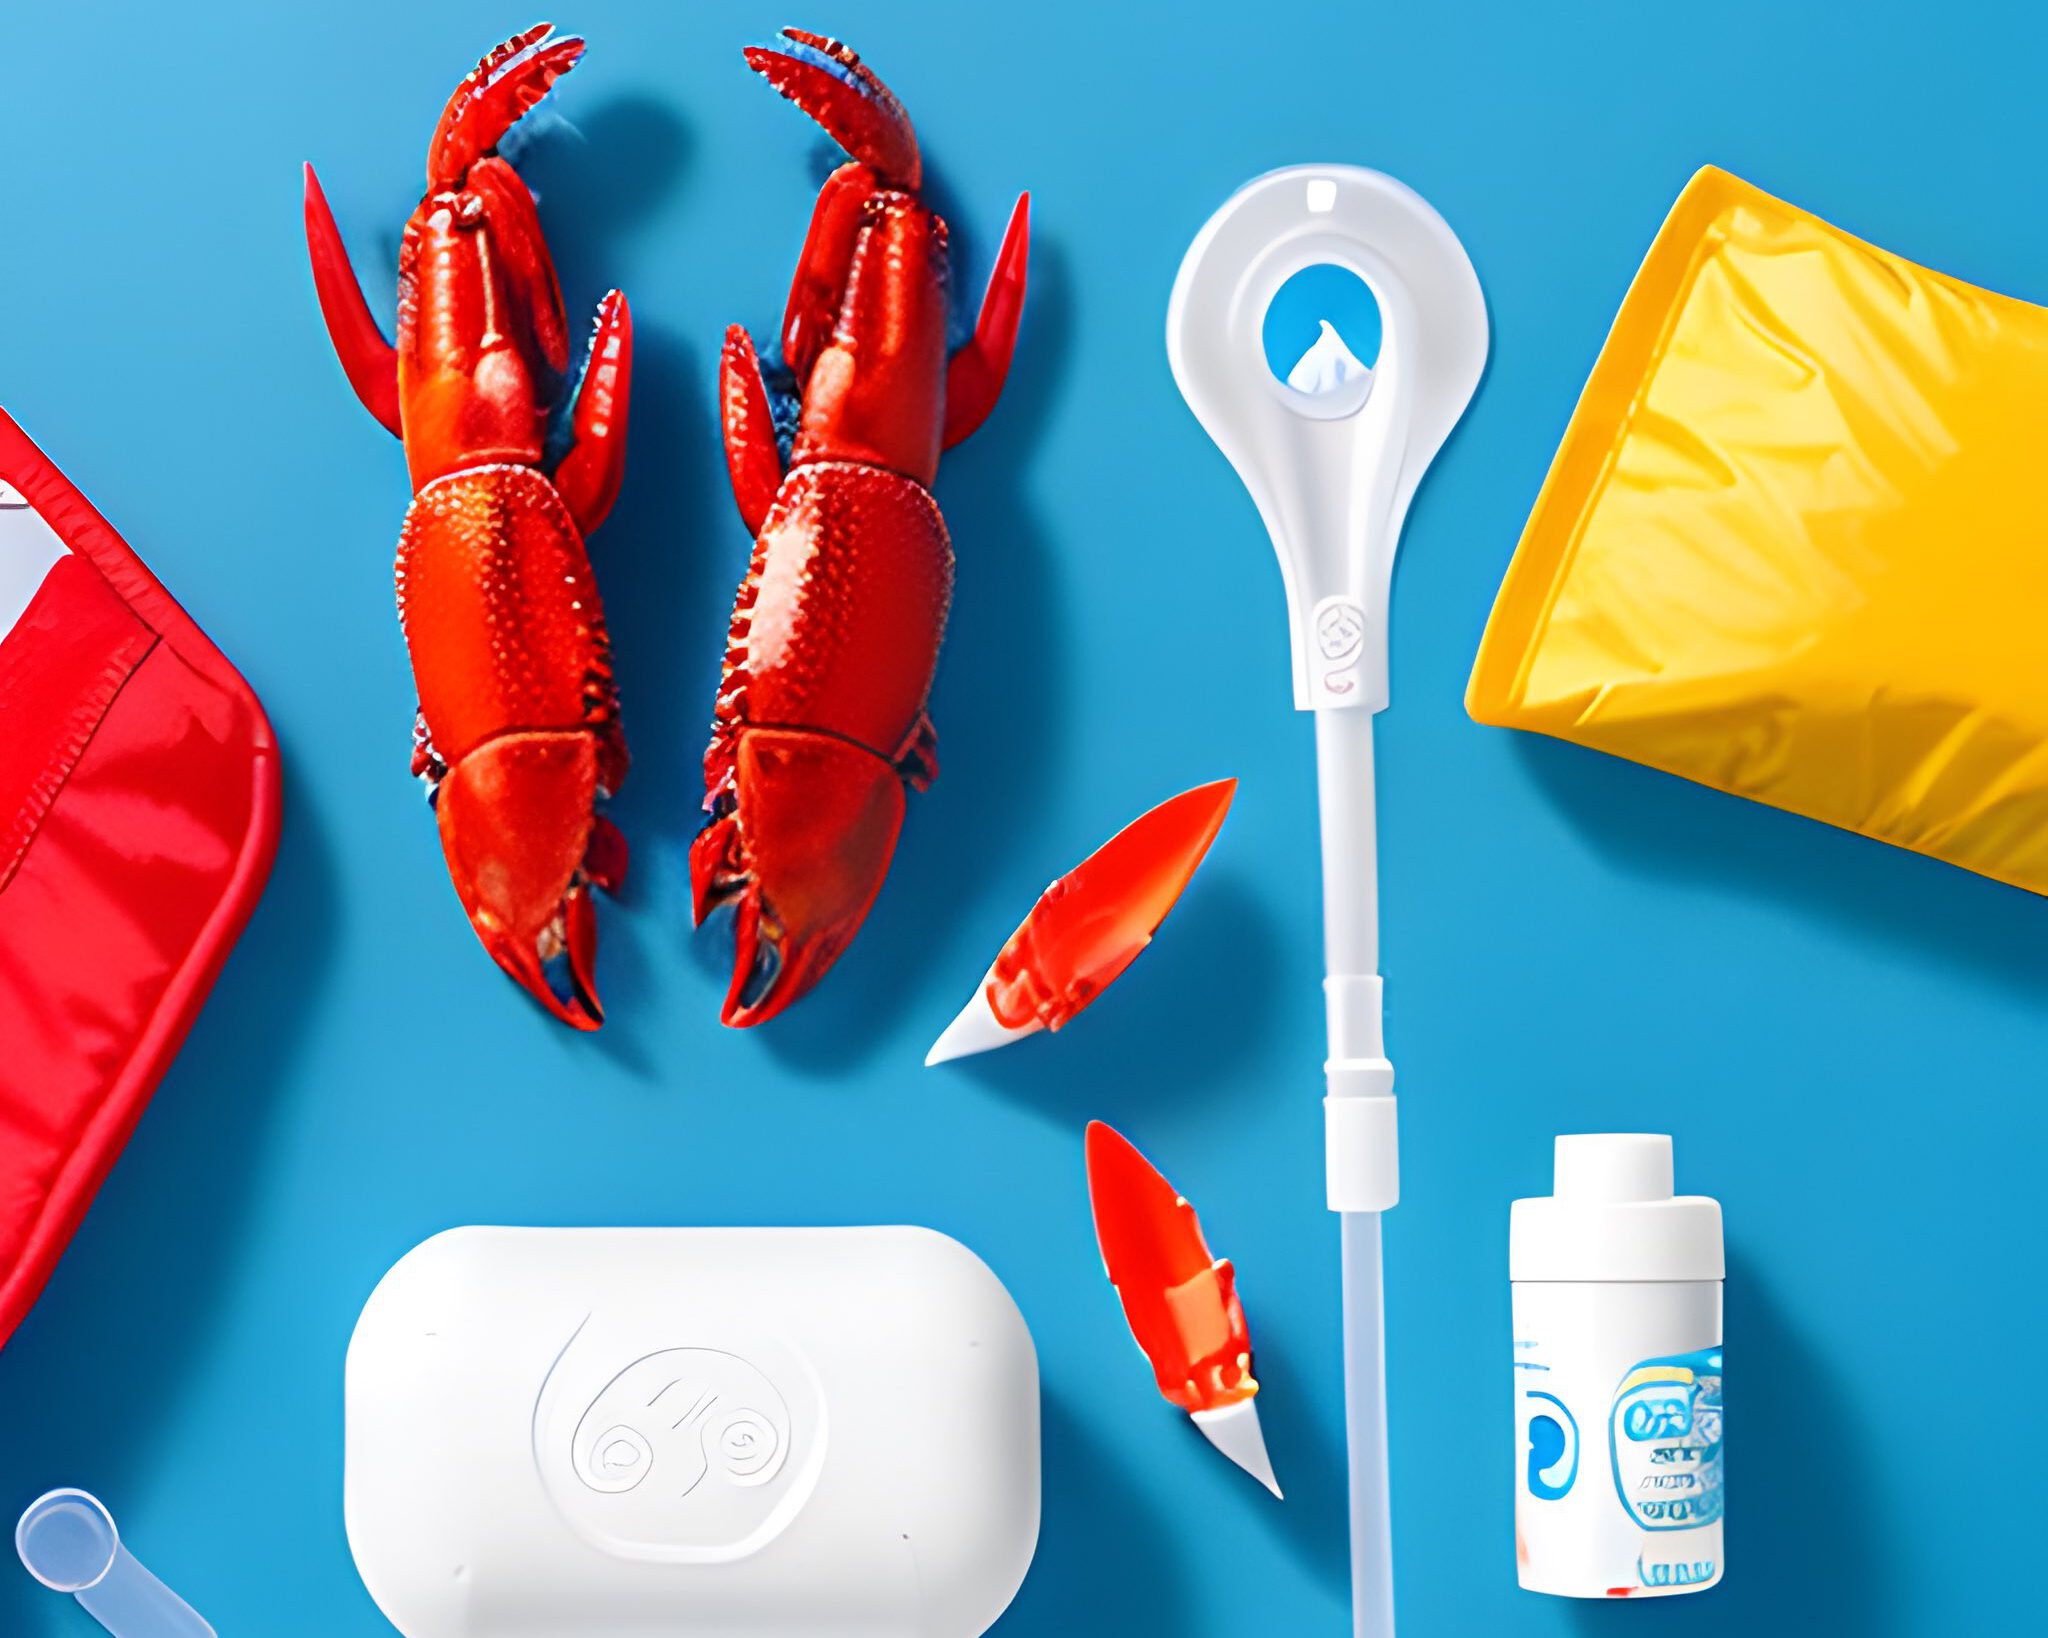 Illustration in bright colors, a red lobster, a yellow pillow, a white tampon applicator a white vial all on a light blue background